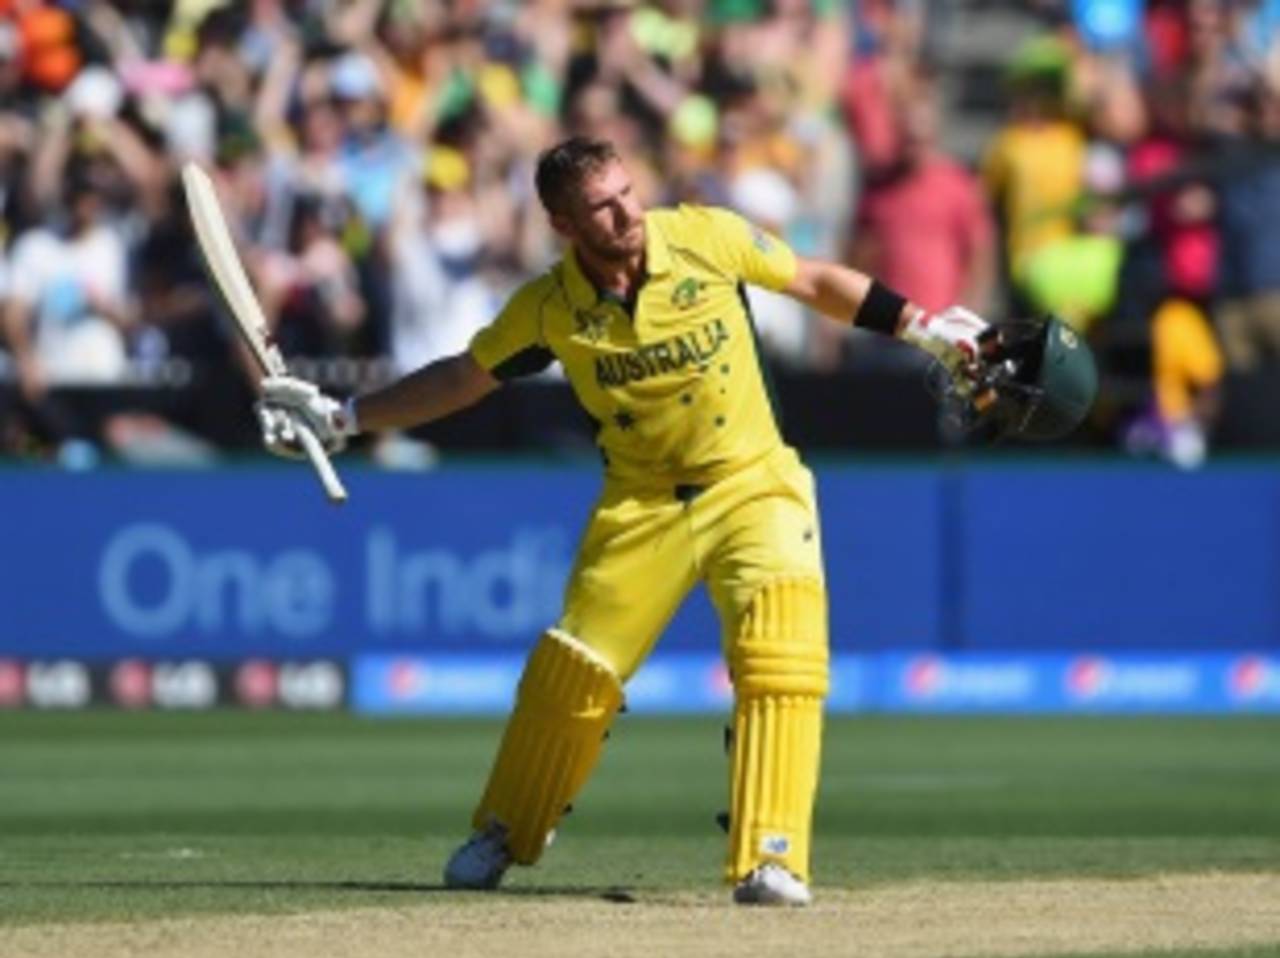 Aaron Finch celebrates after becoming the first centurion of World Cup 2015, Australia v England, Group A, World Cup 2015, Melbourne, February 14, 2015